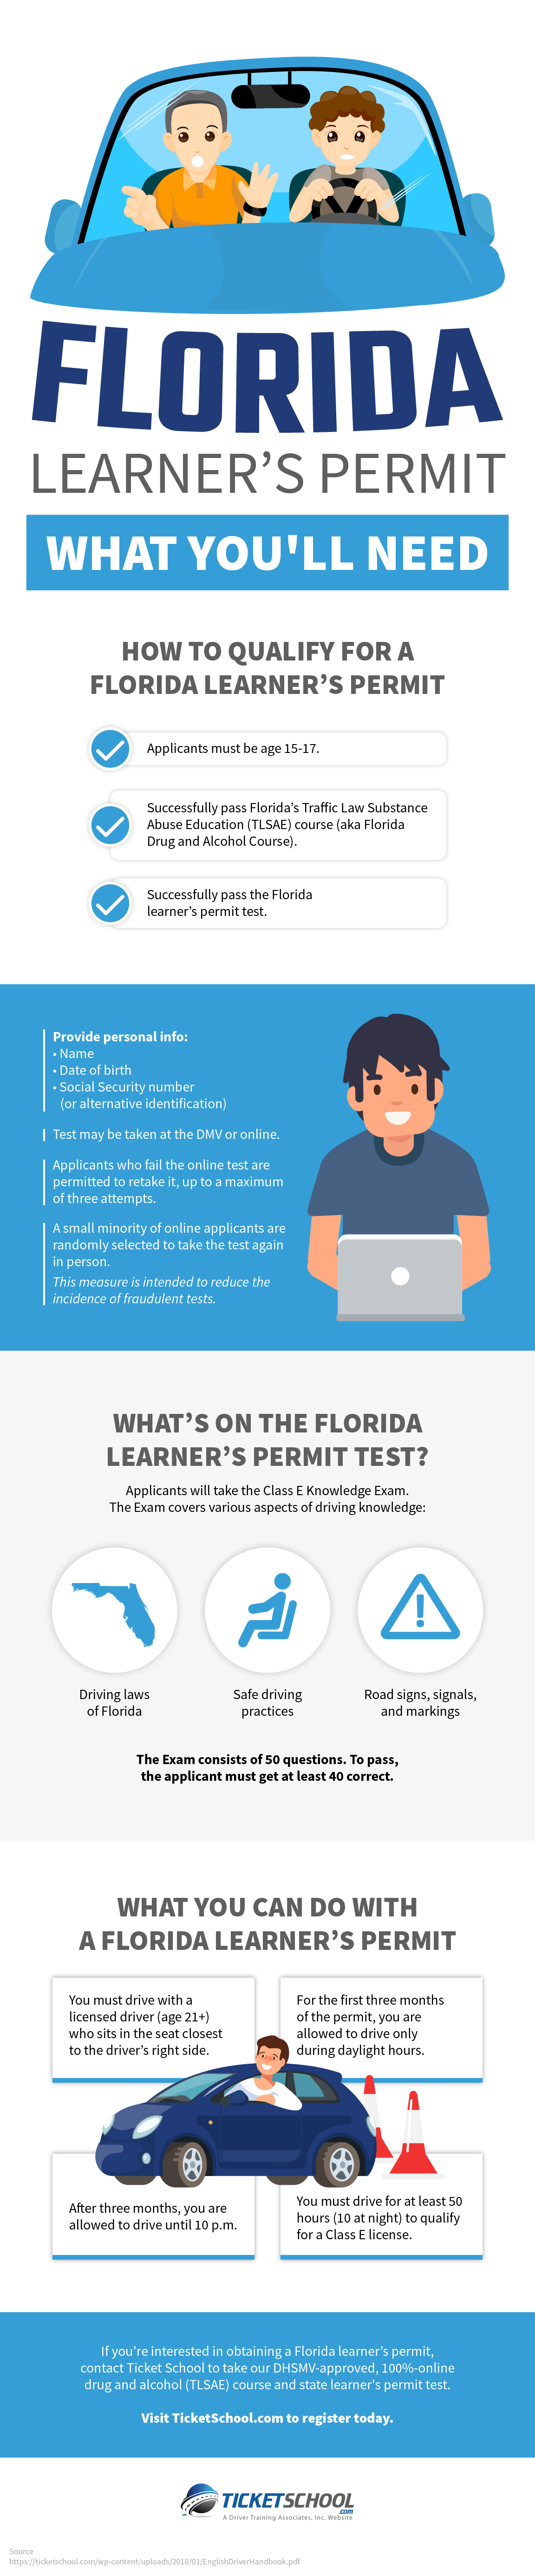 Florida Learner's Permit - What You'll Need - Infographic